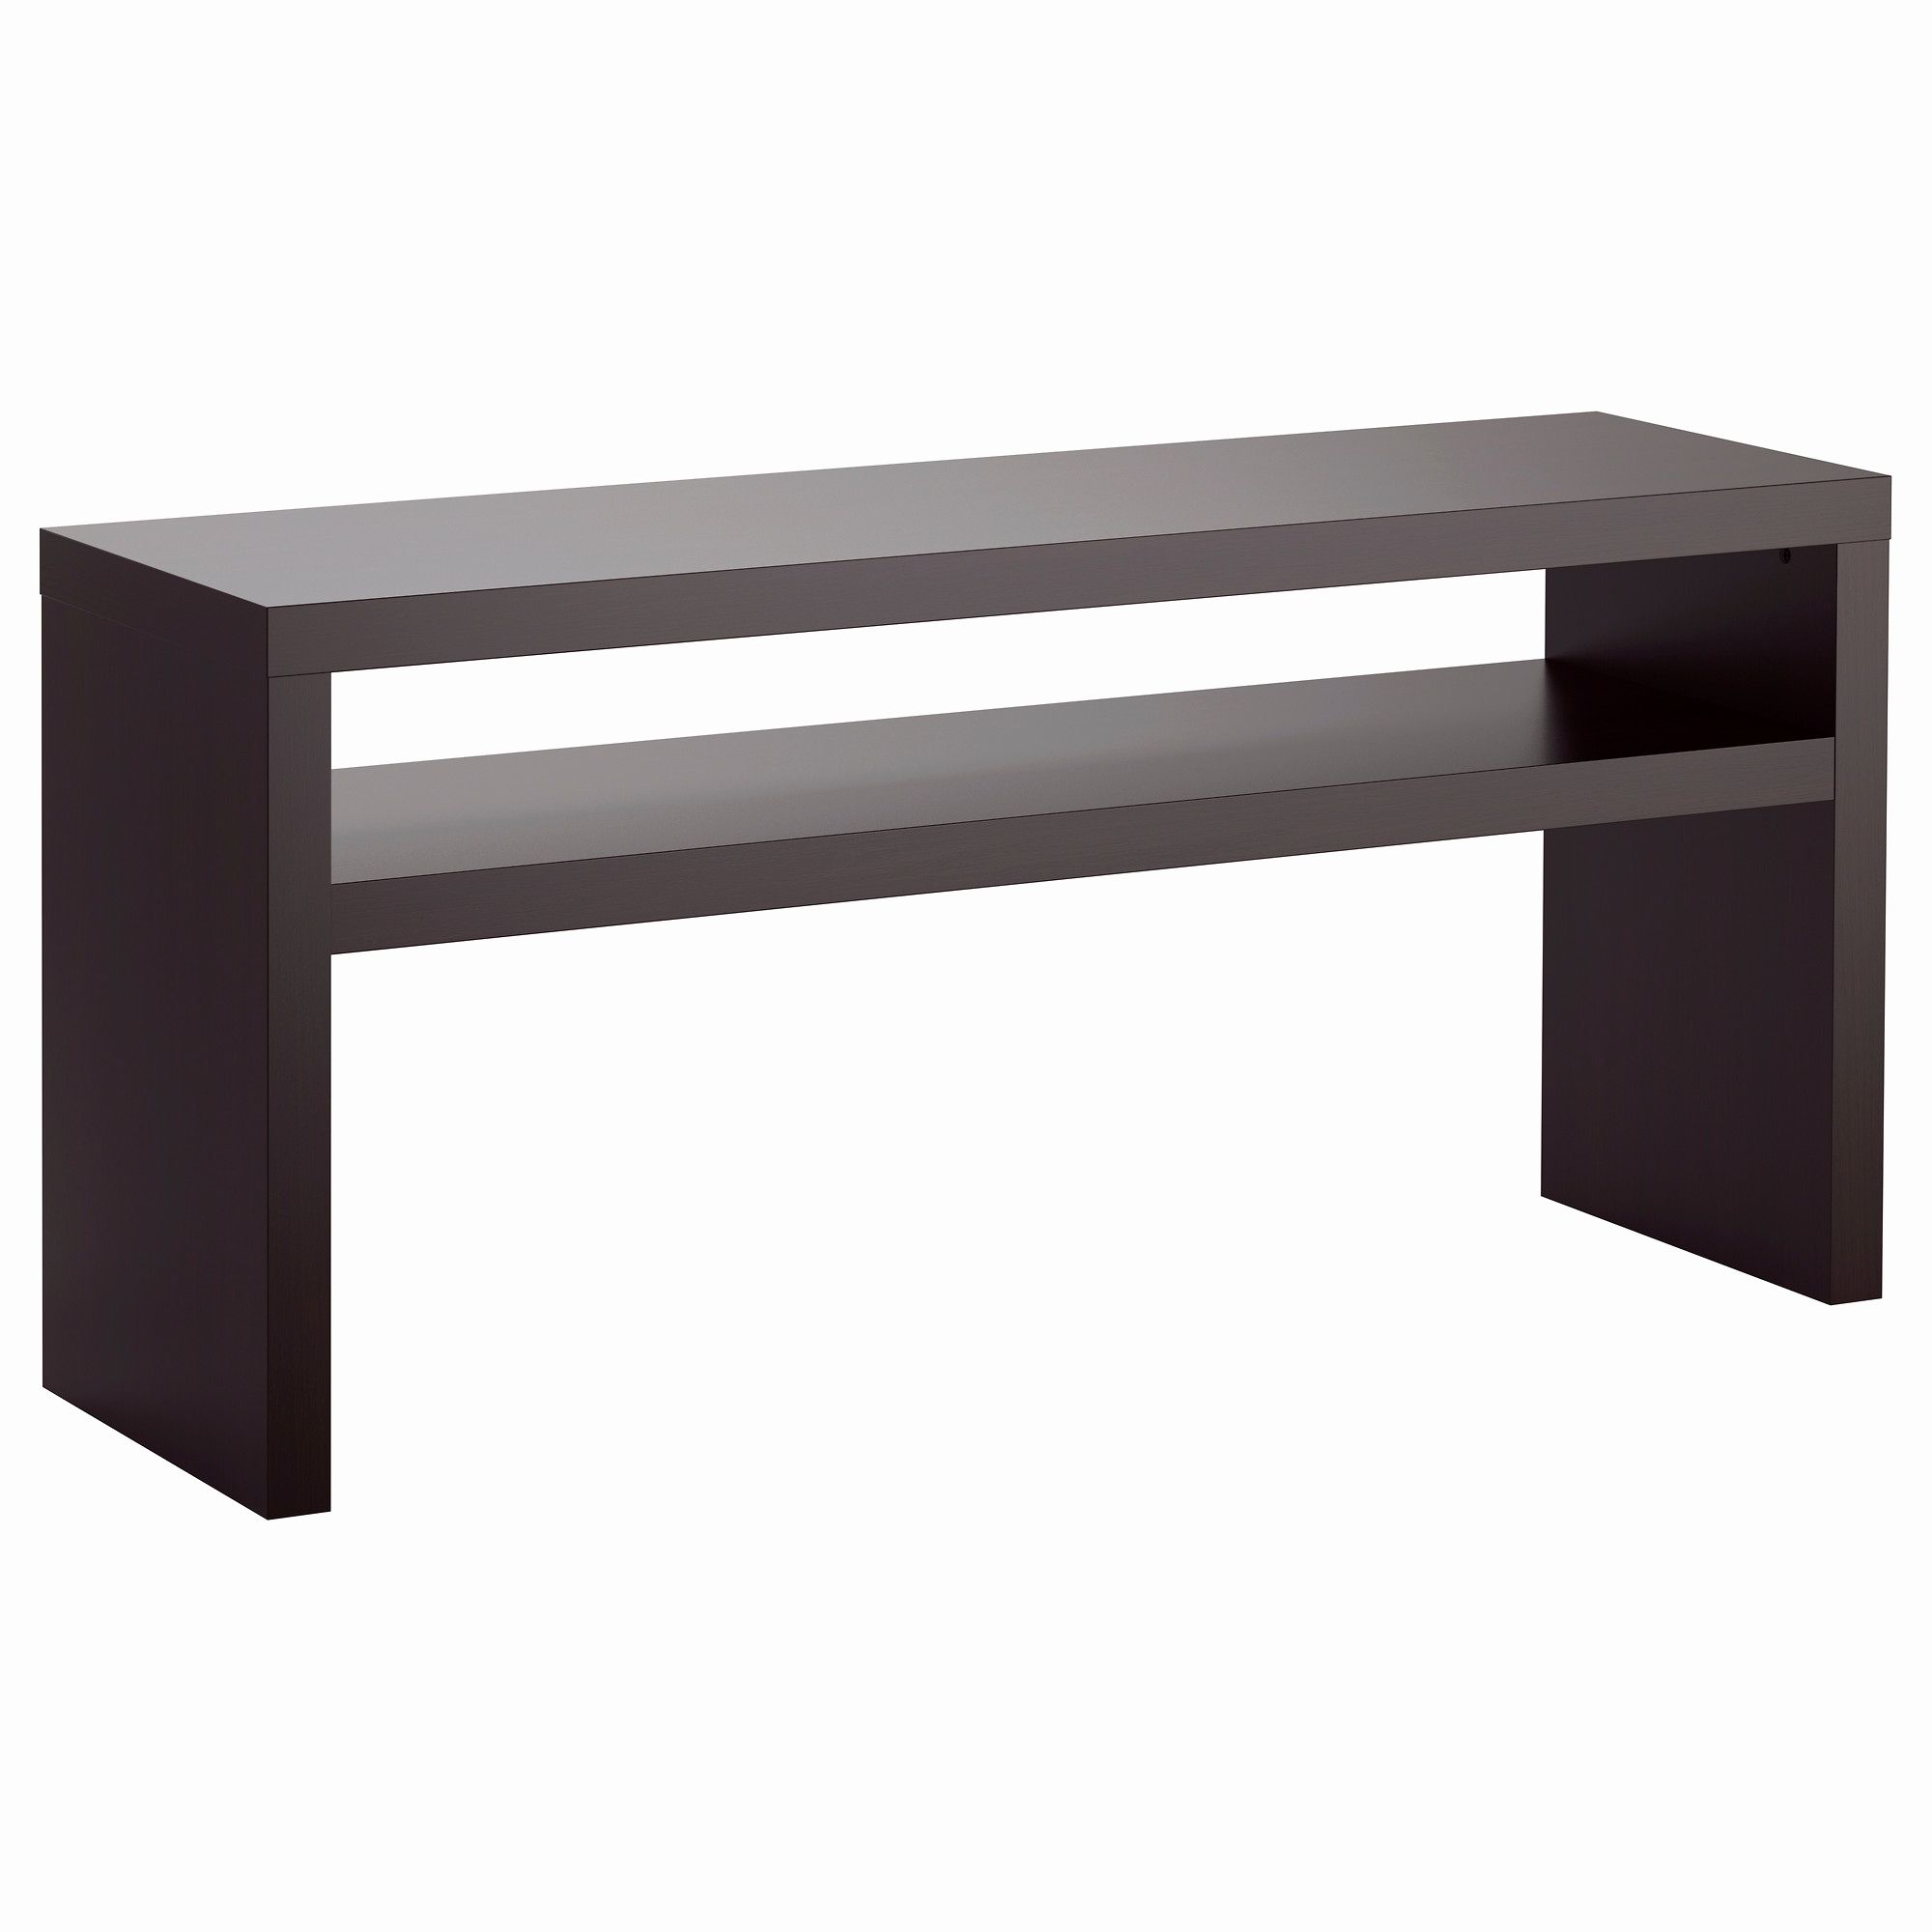 84 Inch Sofa Table Outstanding Console Tables Ikea Console Table Inside Most Recent Silviano 60 Inch Iron Console Tables (View 13 of 20)